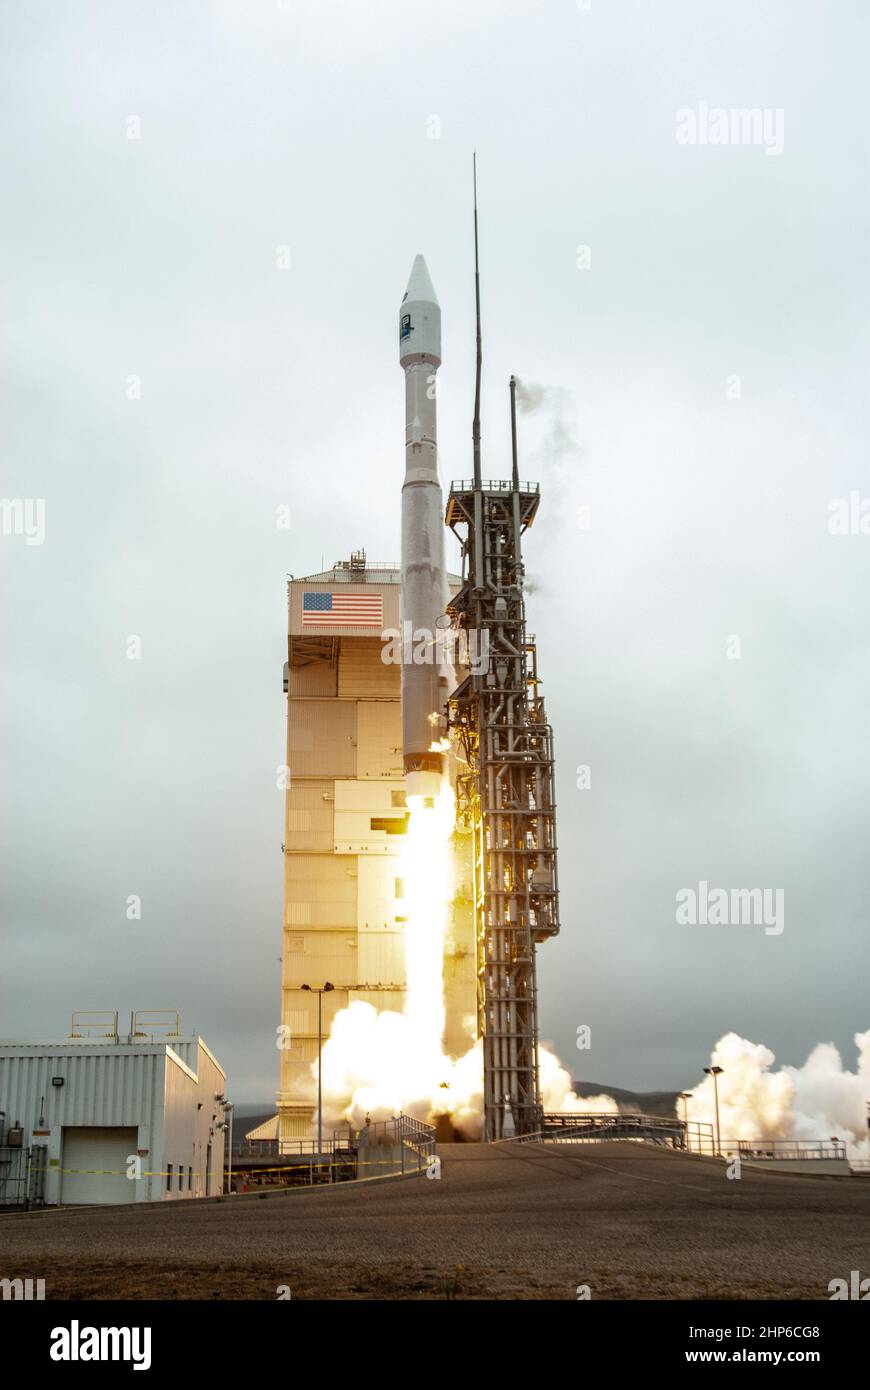 NASA’s Landsat 9 satellite launches on a United Launch Alliance Atlas V 401 rocket from Space Launch Complex 3 at Vandenberg Space Force Station in California on Sept. 27, 2021. Launch time was 2:11 p.m. EDT (11:11 a.m. PDT). The launch is managed by NASA’s Launch Services Program, based at the agency’s Kennedy Space Center in Florida. Landsat 9 will join its sister satellite, Landsat 8, in orbit in collecting images from across the planet every eight days. This calibrated data will continue the Landsat program’s critical role in monitoring the health of Earth and helping people manage essenti Stock Photo